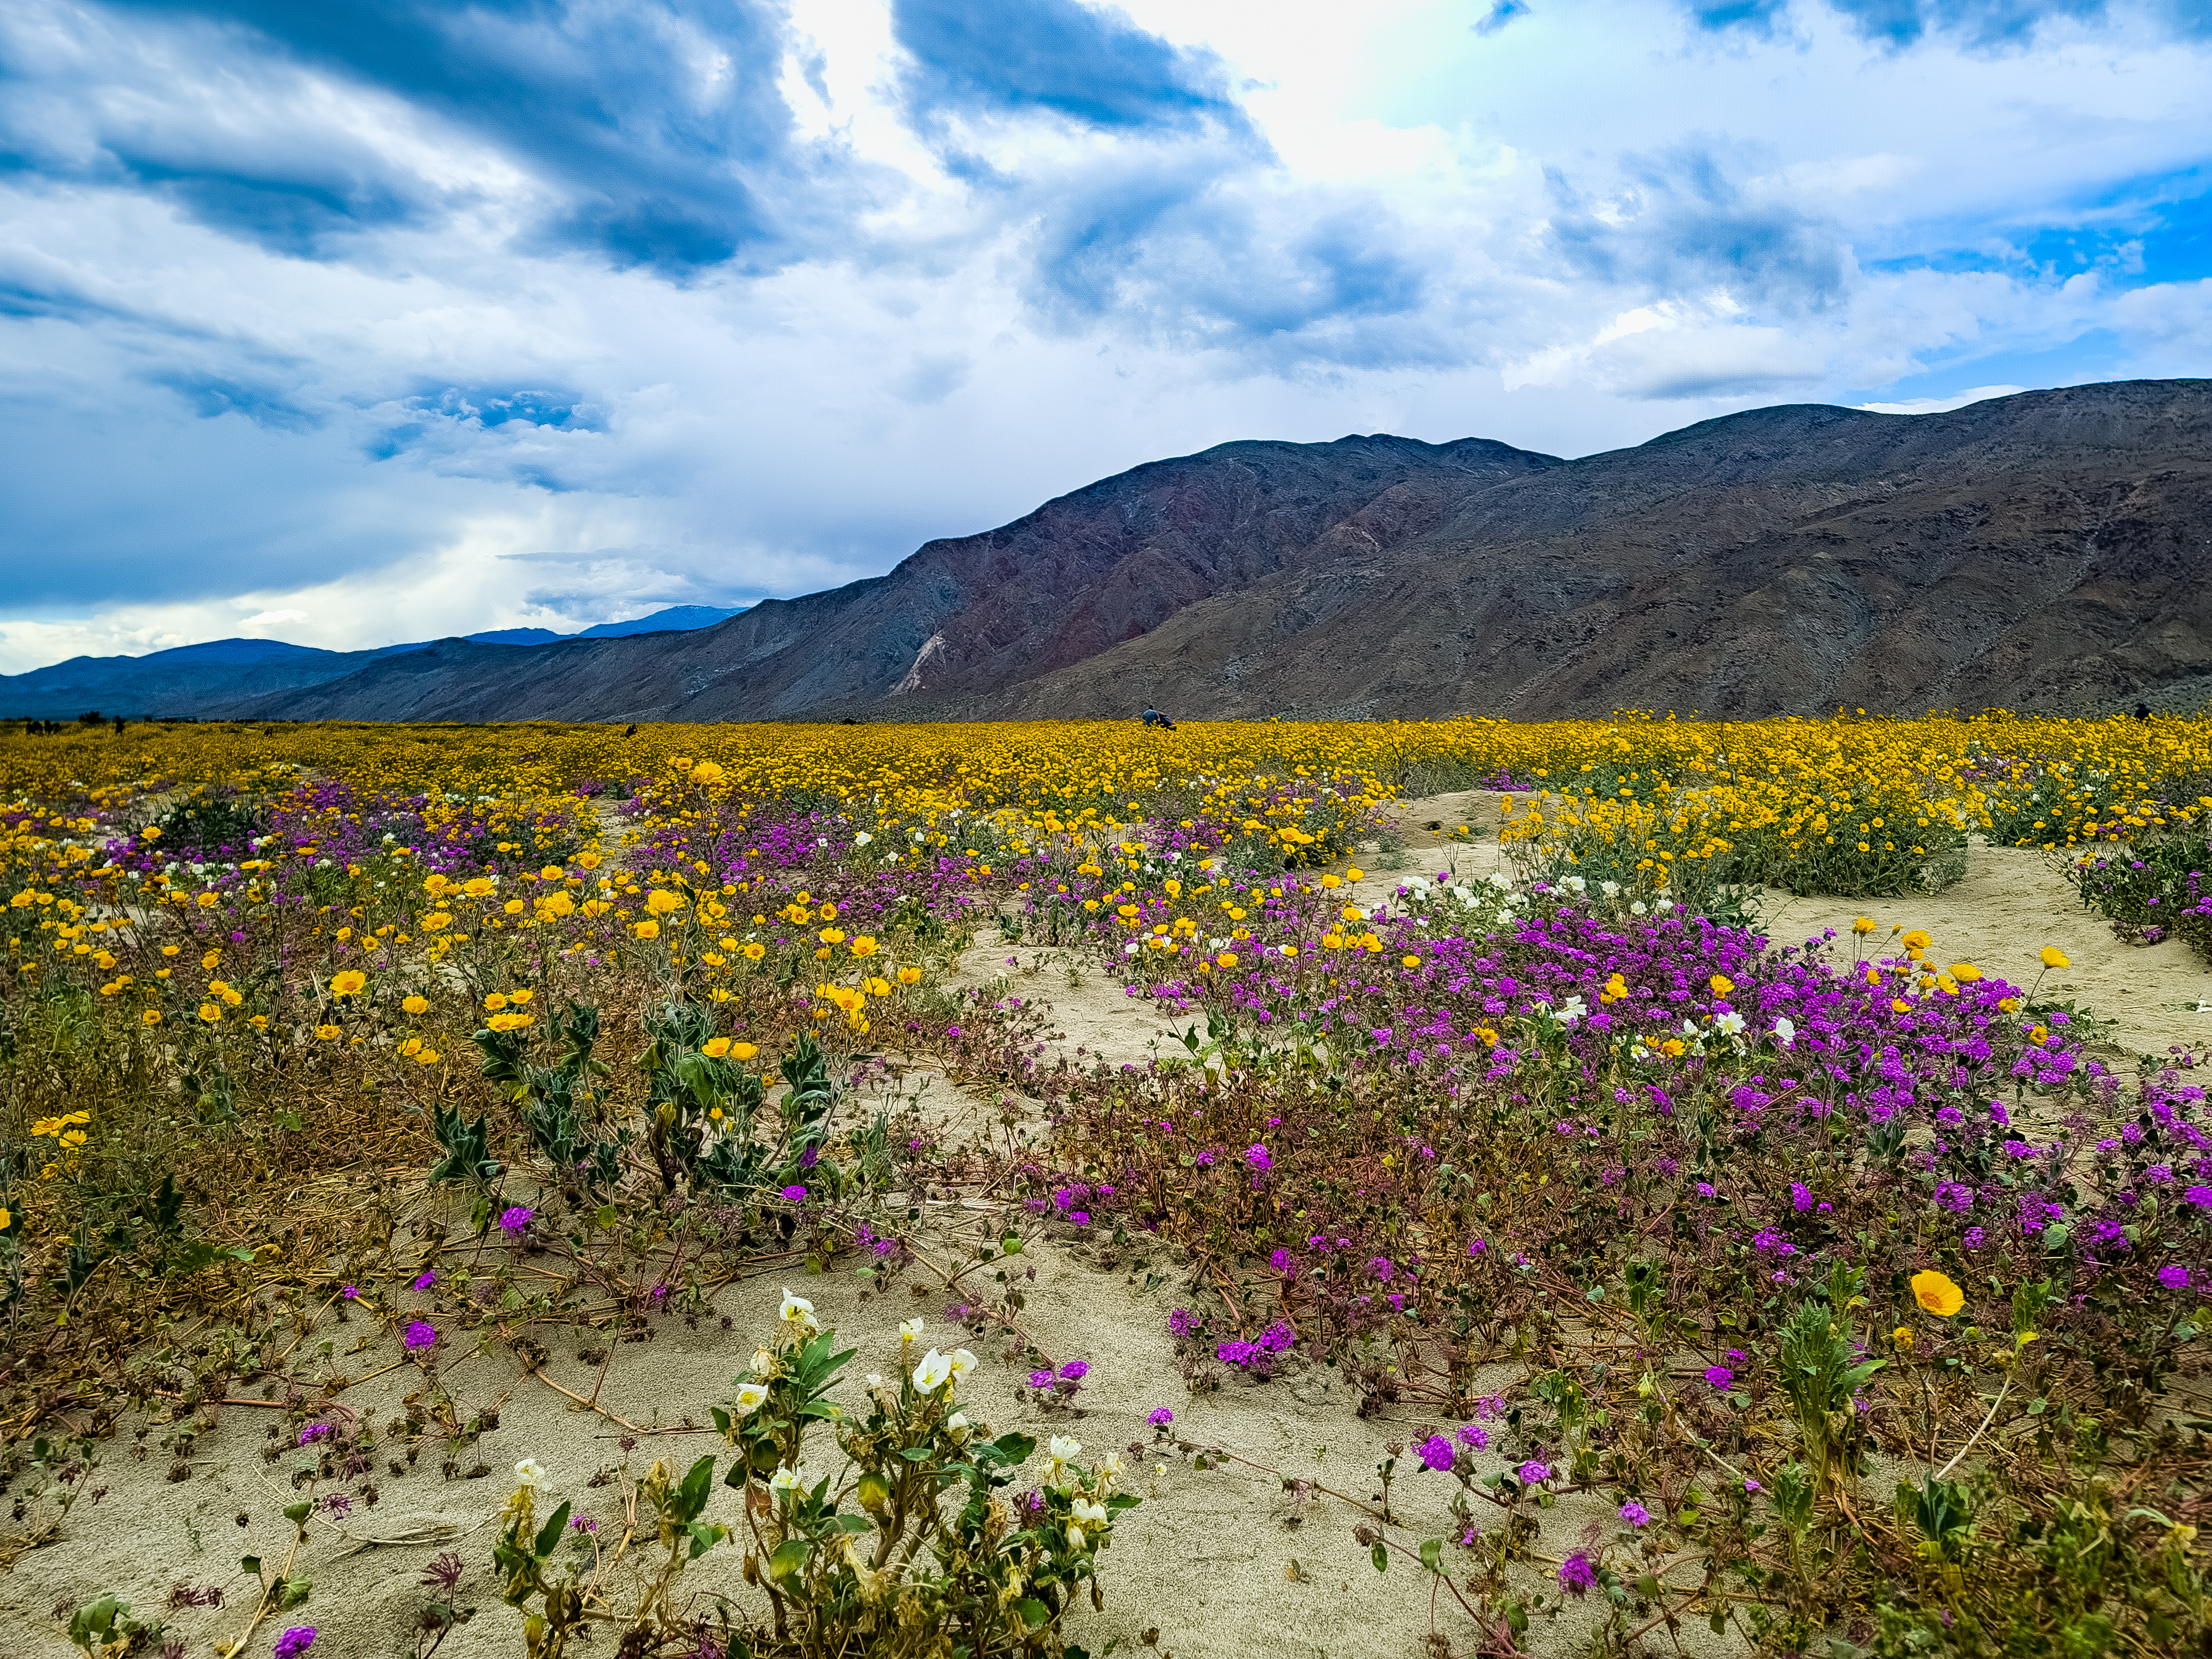 Sand verbena flowers Bloom in late February at Anza-Borrego Desert State Park